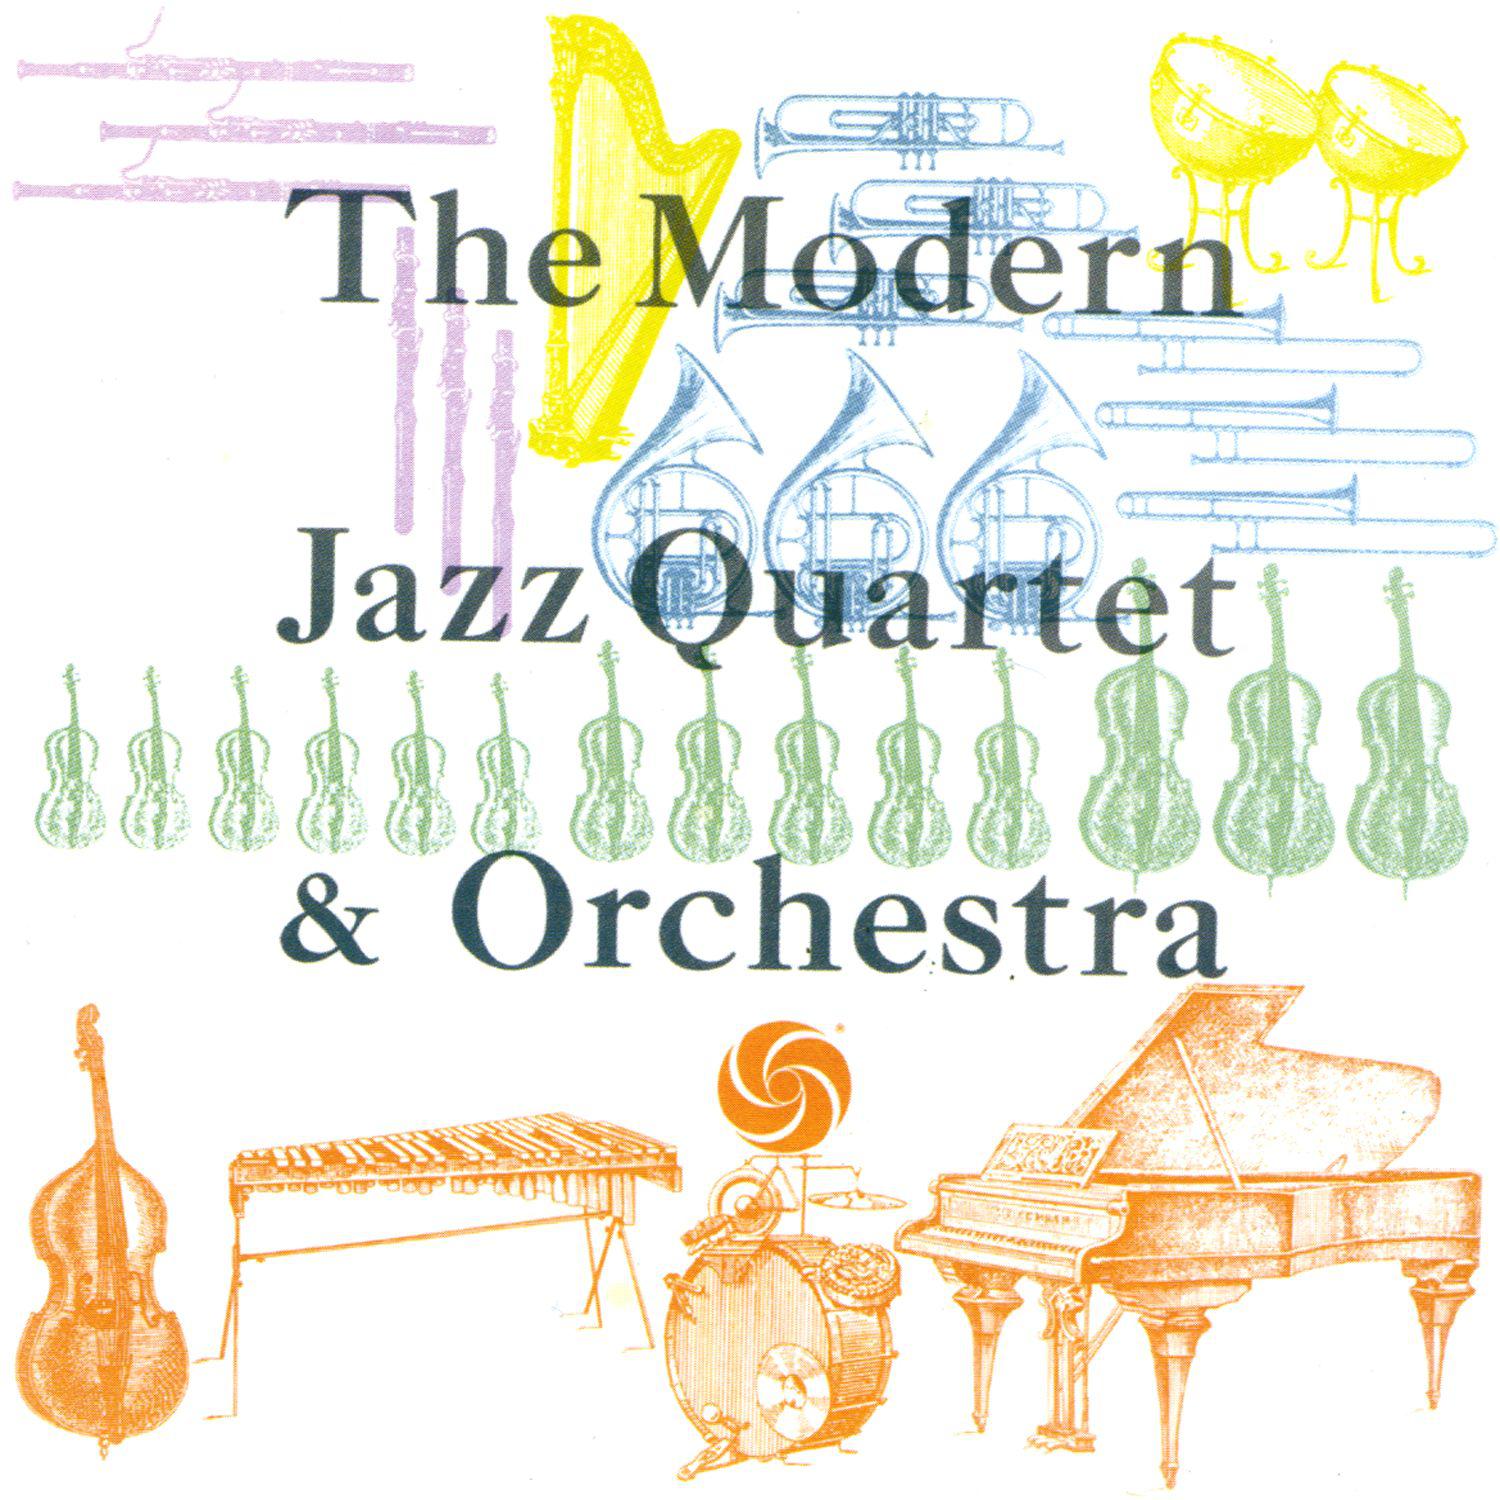 Concertino for Jazz Quartet and Orchestra: First Movement